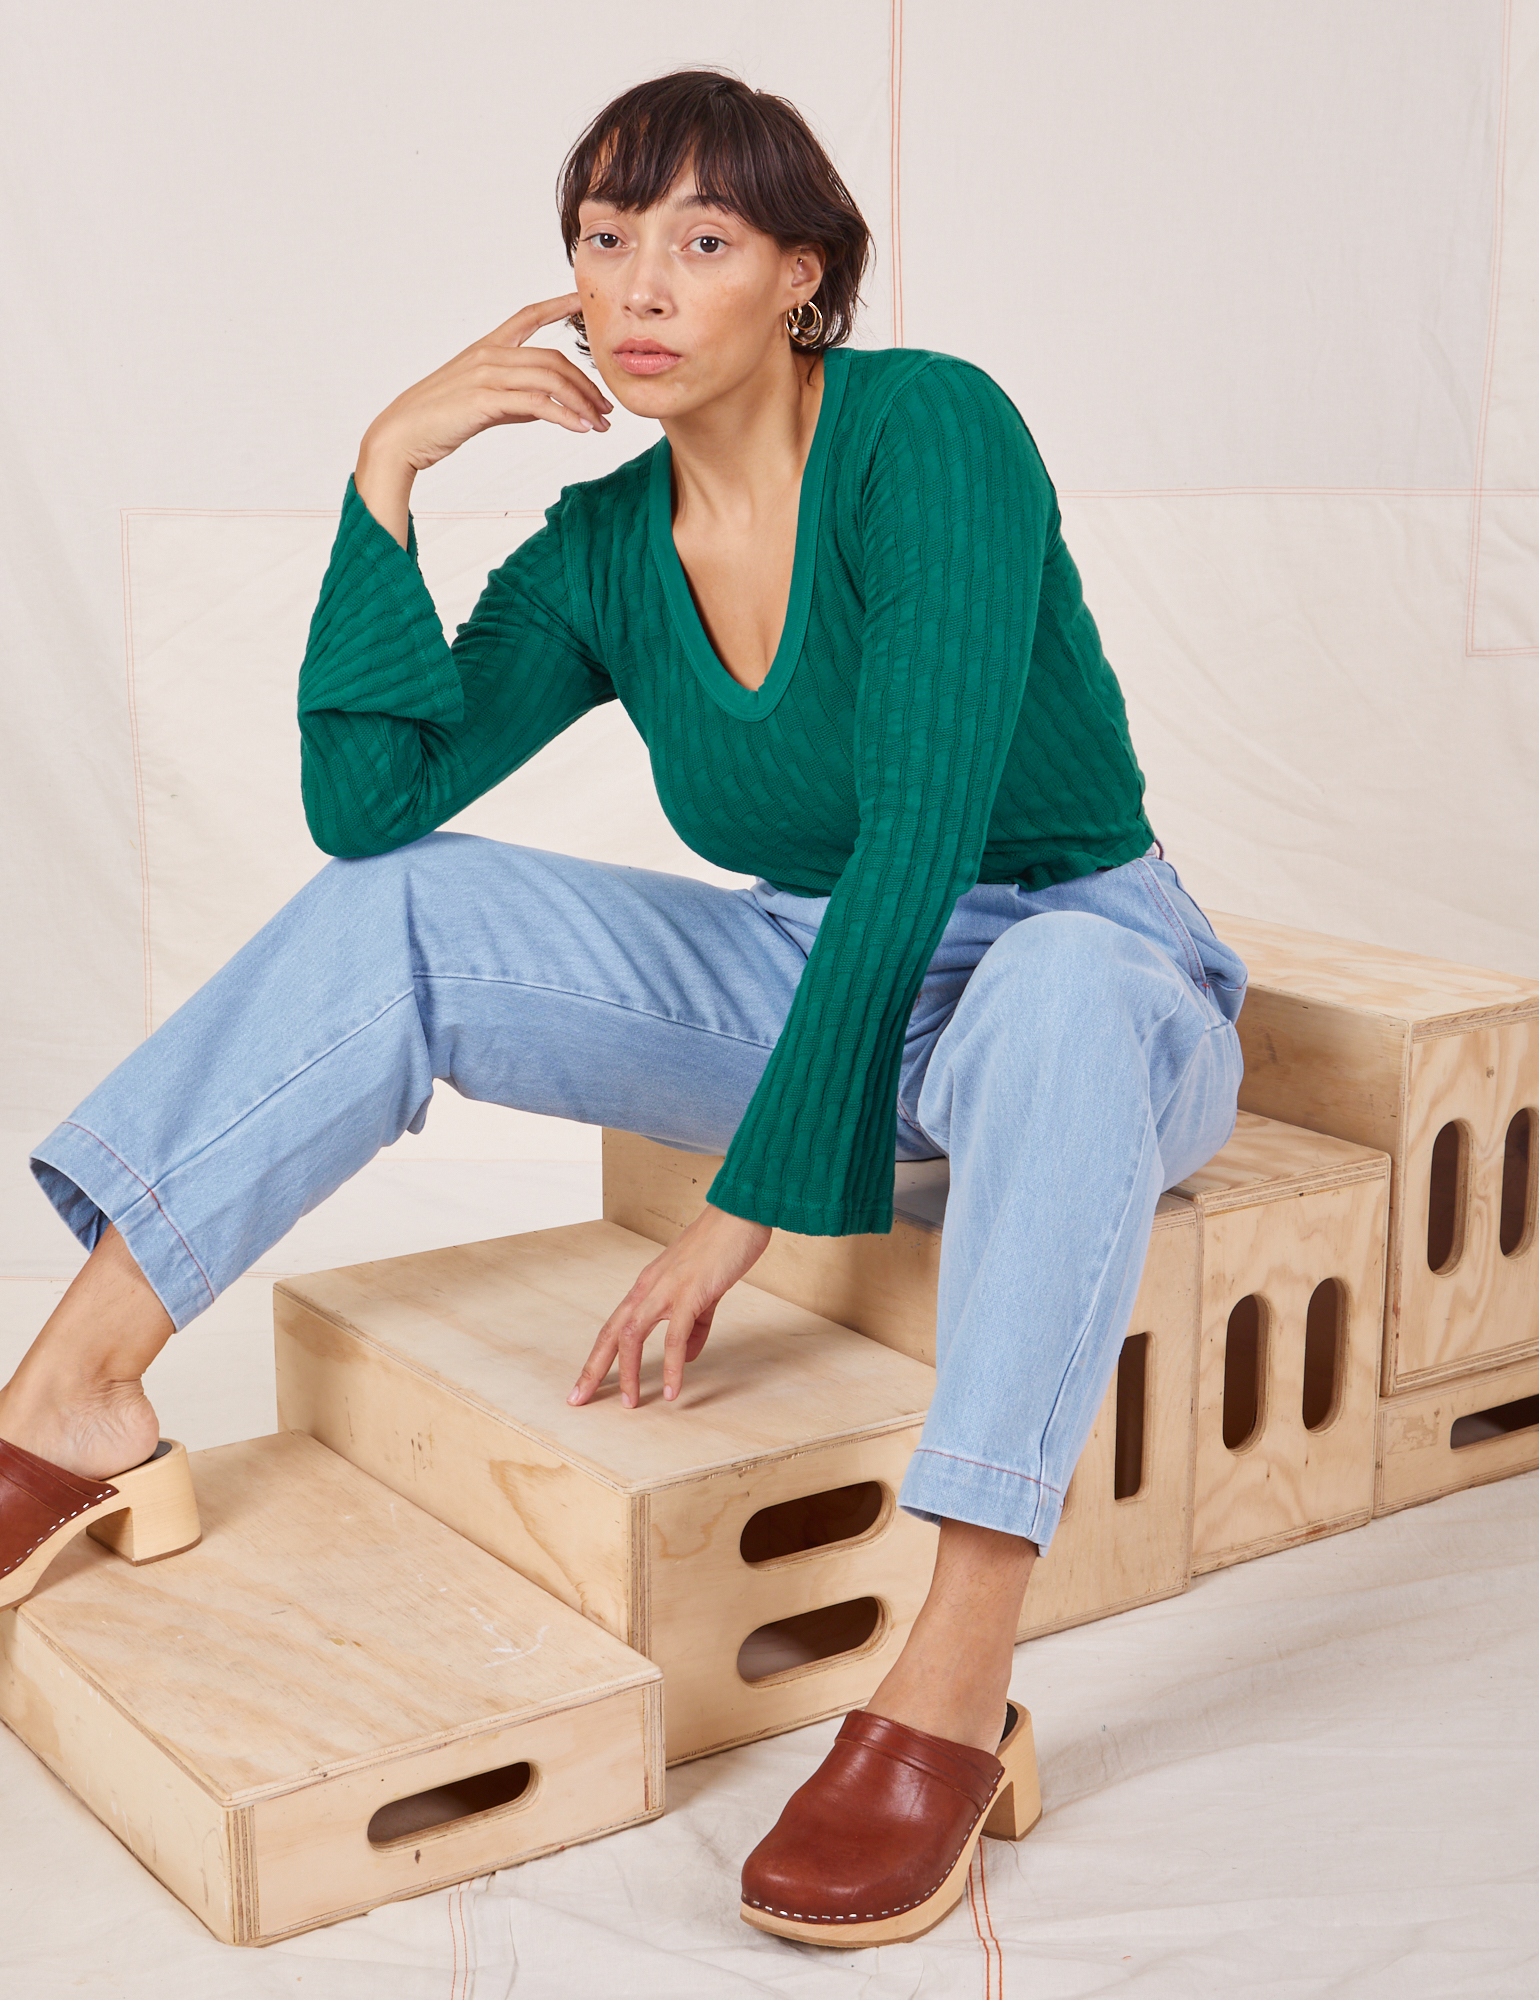 Tiara is wearing Bell Sleeve Top in Hunter Green and light wash Trouser Jeans